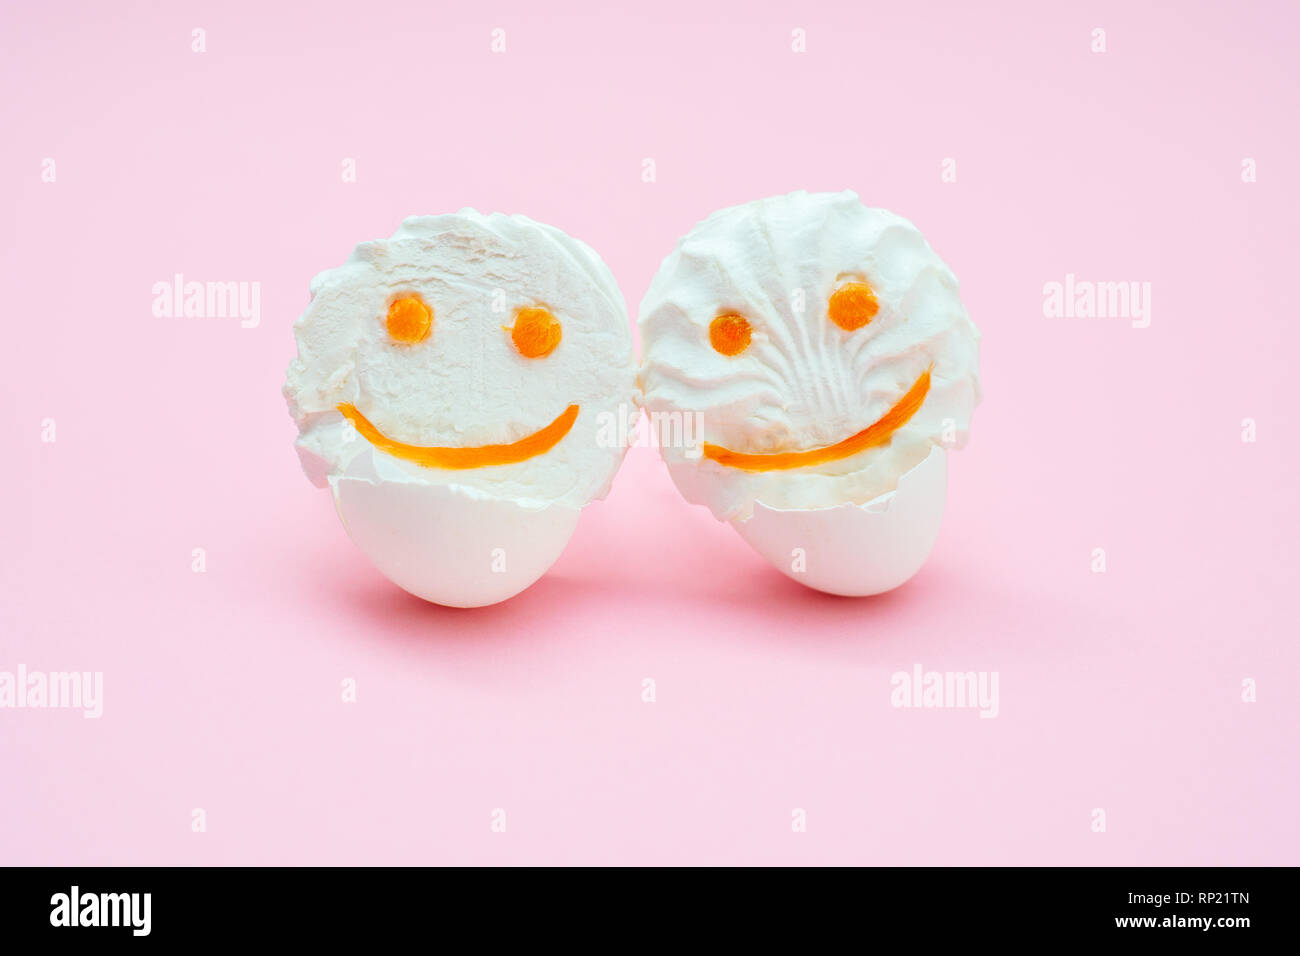 marshmallows fluff with eyes and smiles from carrots. Funny face in an egg shell stand in an embrace with each other on a pink background. isolated Stock Photo